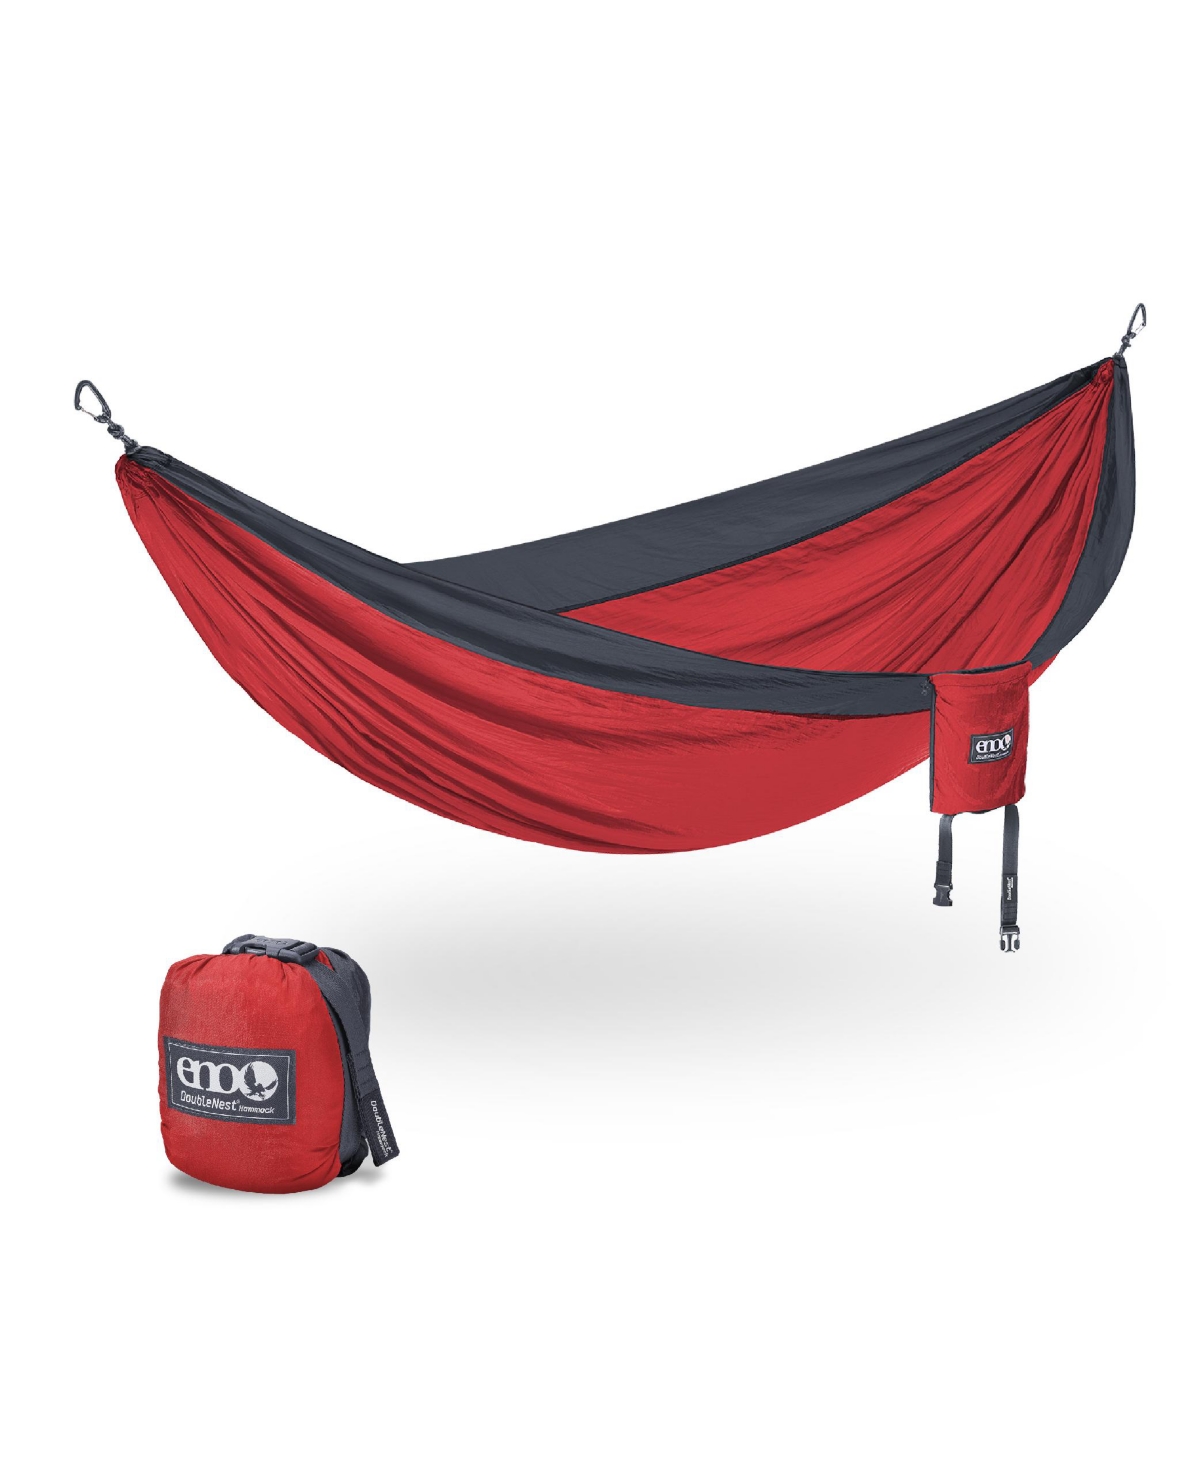 DoubleNest Hammock - Lightweight, Portable, 1 to 2 Person Hammock - For Camping, Hiking, Backpacking, Travel, a Festival, or the Beach - Red/Charc